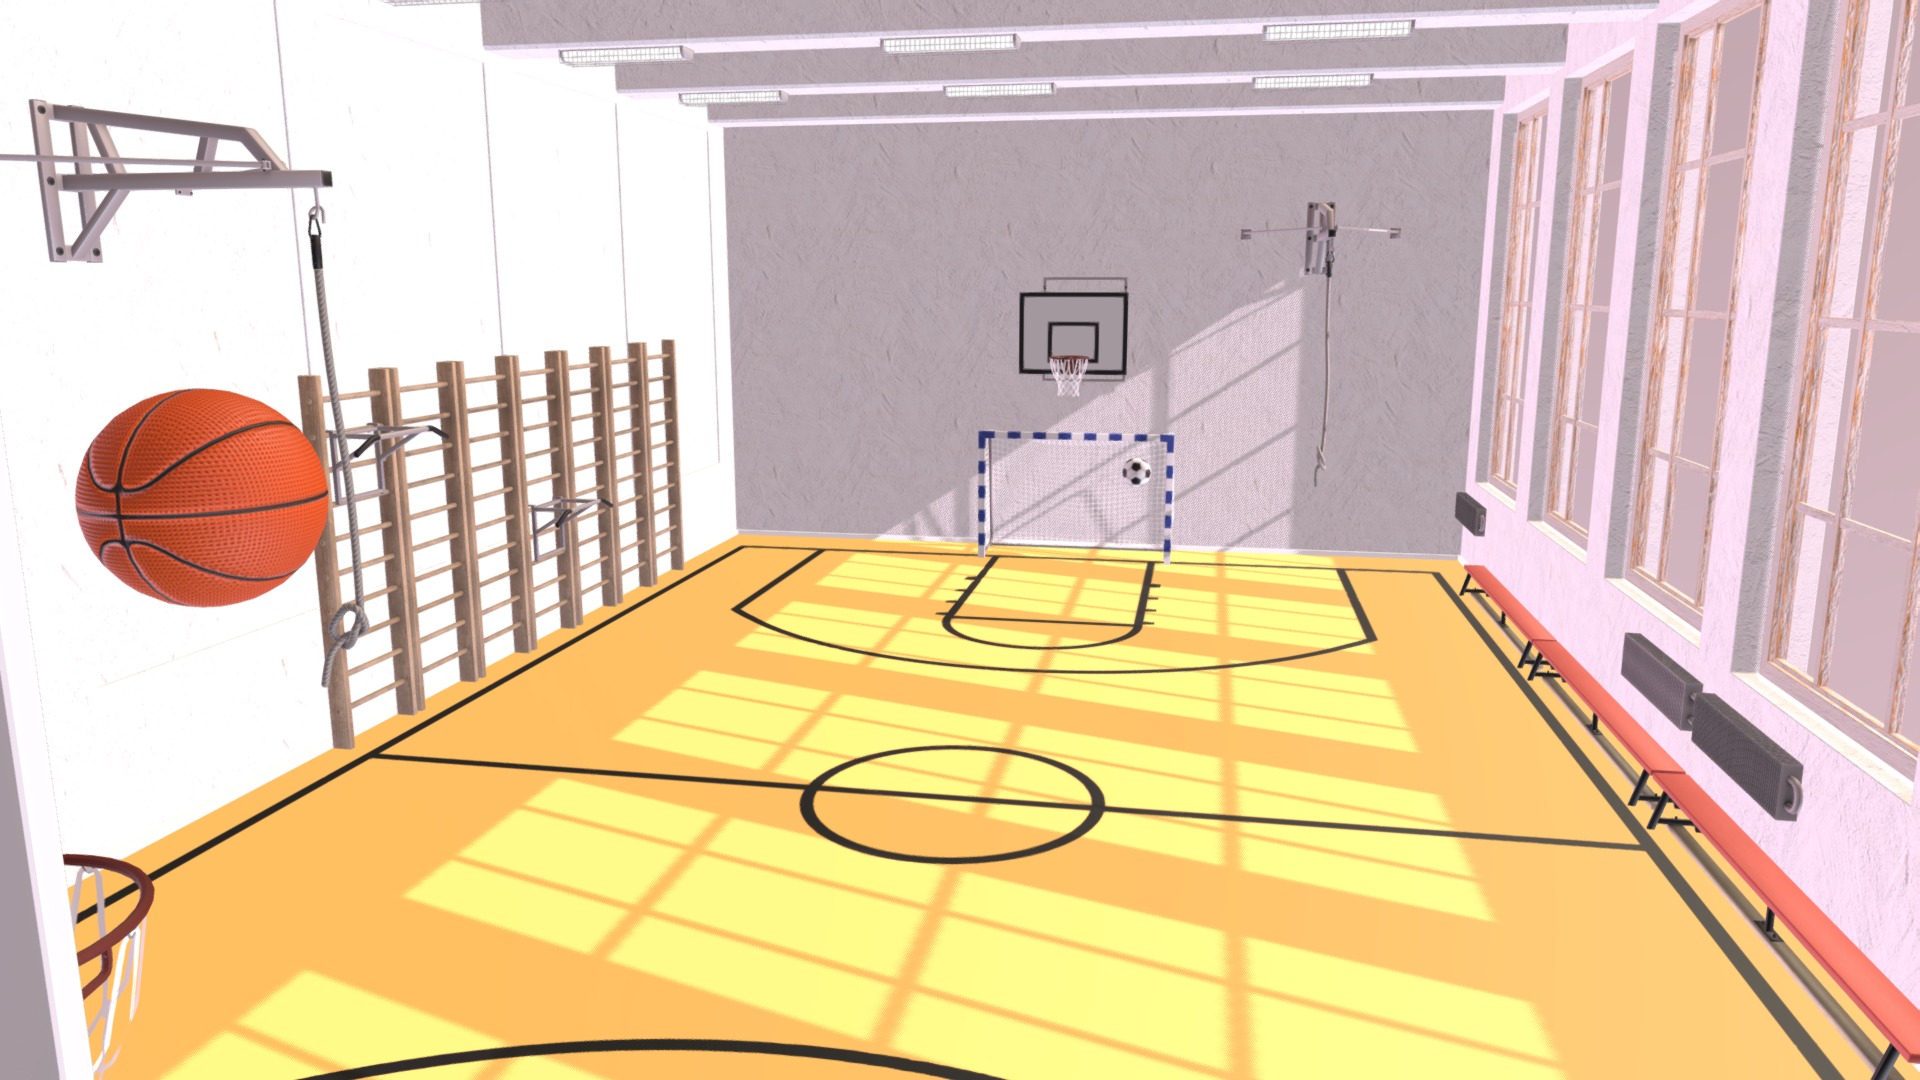 3D model School gym – inventory and interior - This is a 3D model of the School gym - inventory and interior. The 3D model is about a basketball court with a basketball hoop.